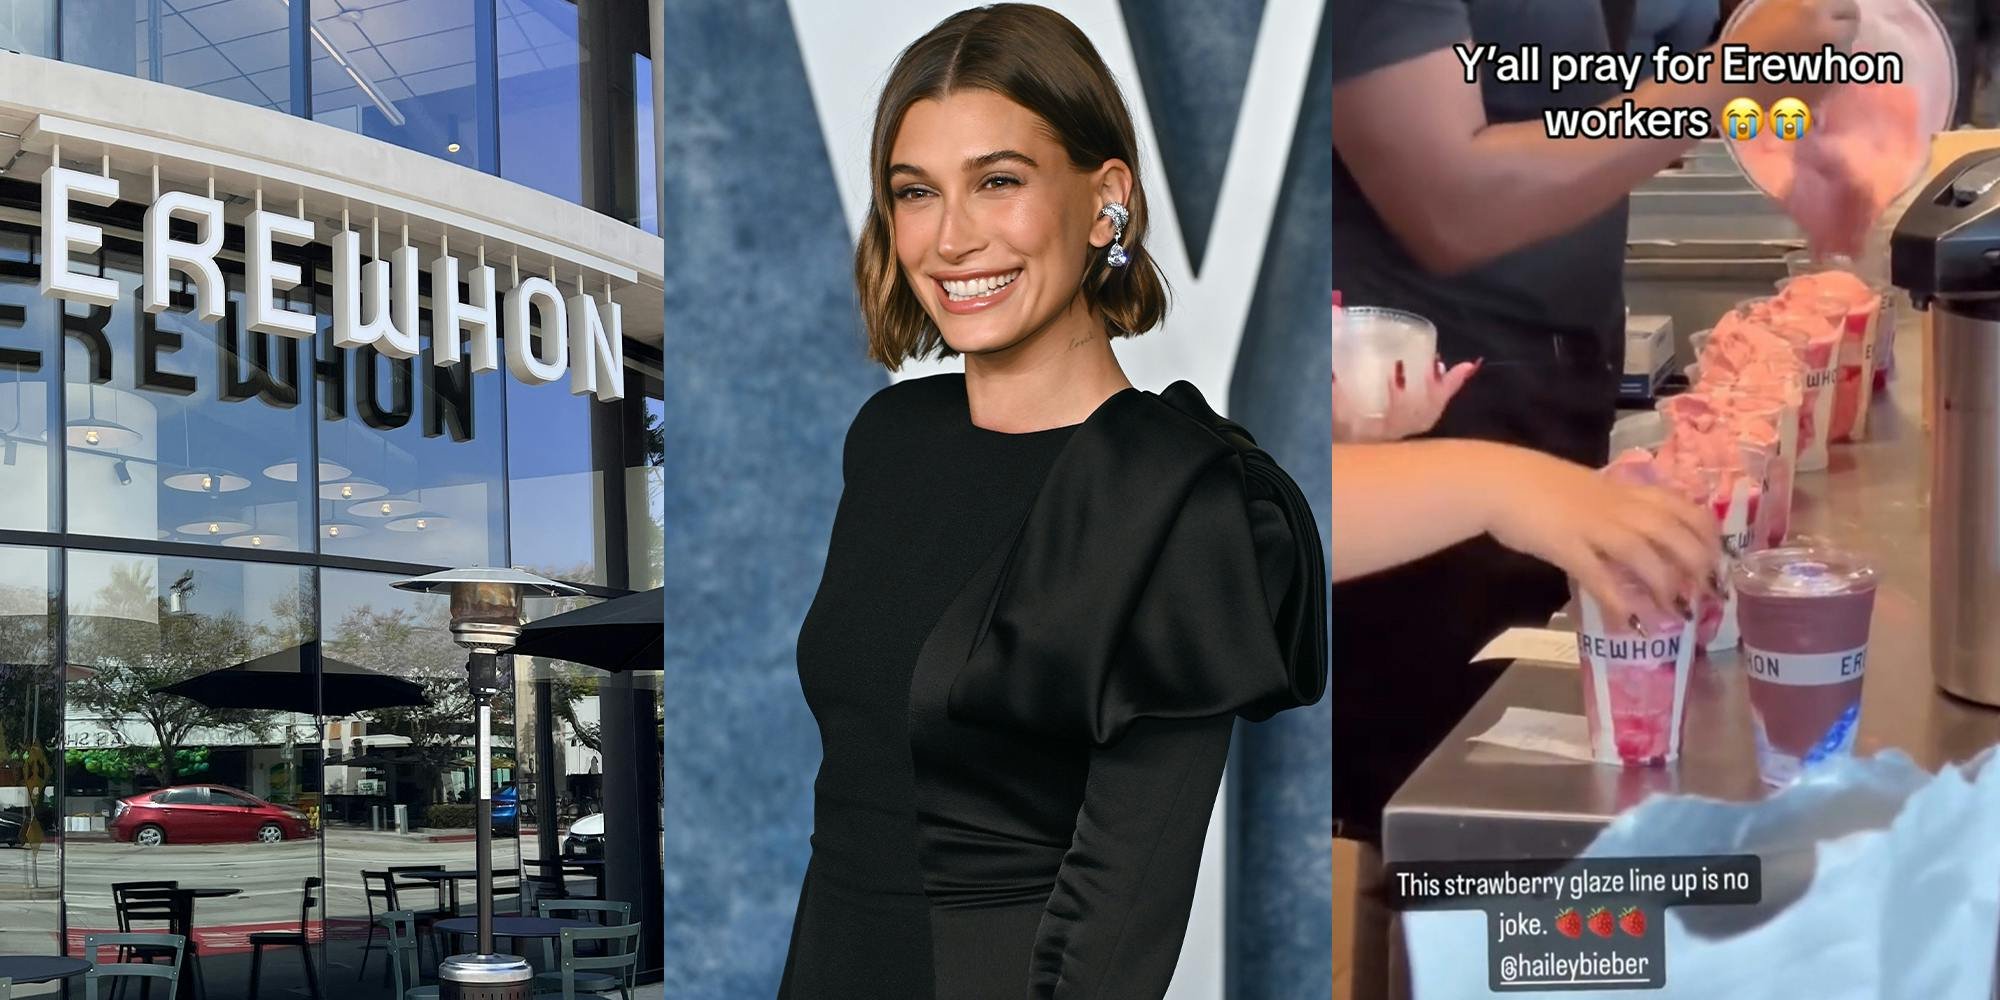 'I know they're tired ': Customer shows Erewhon workers struggling to keep up with viral Hailey Bieber smoothie orders